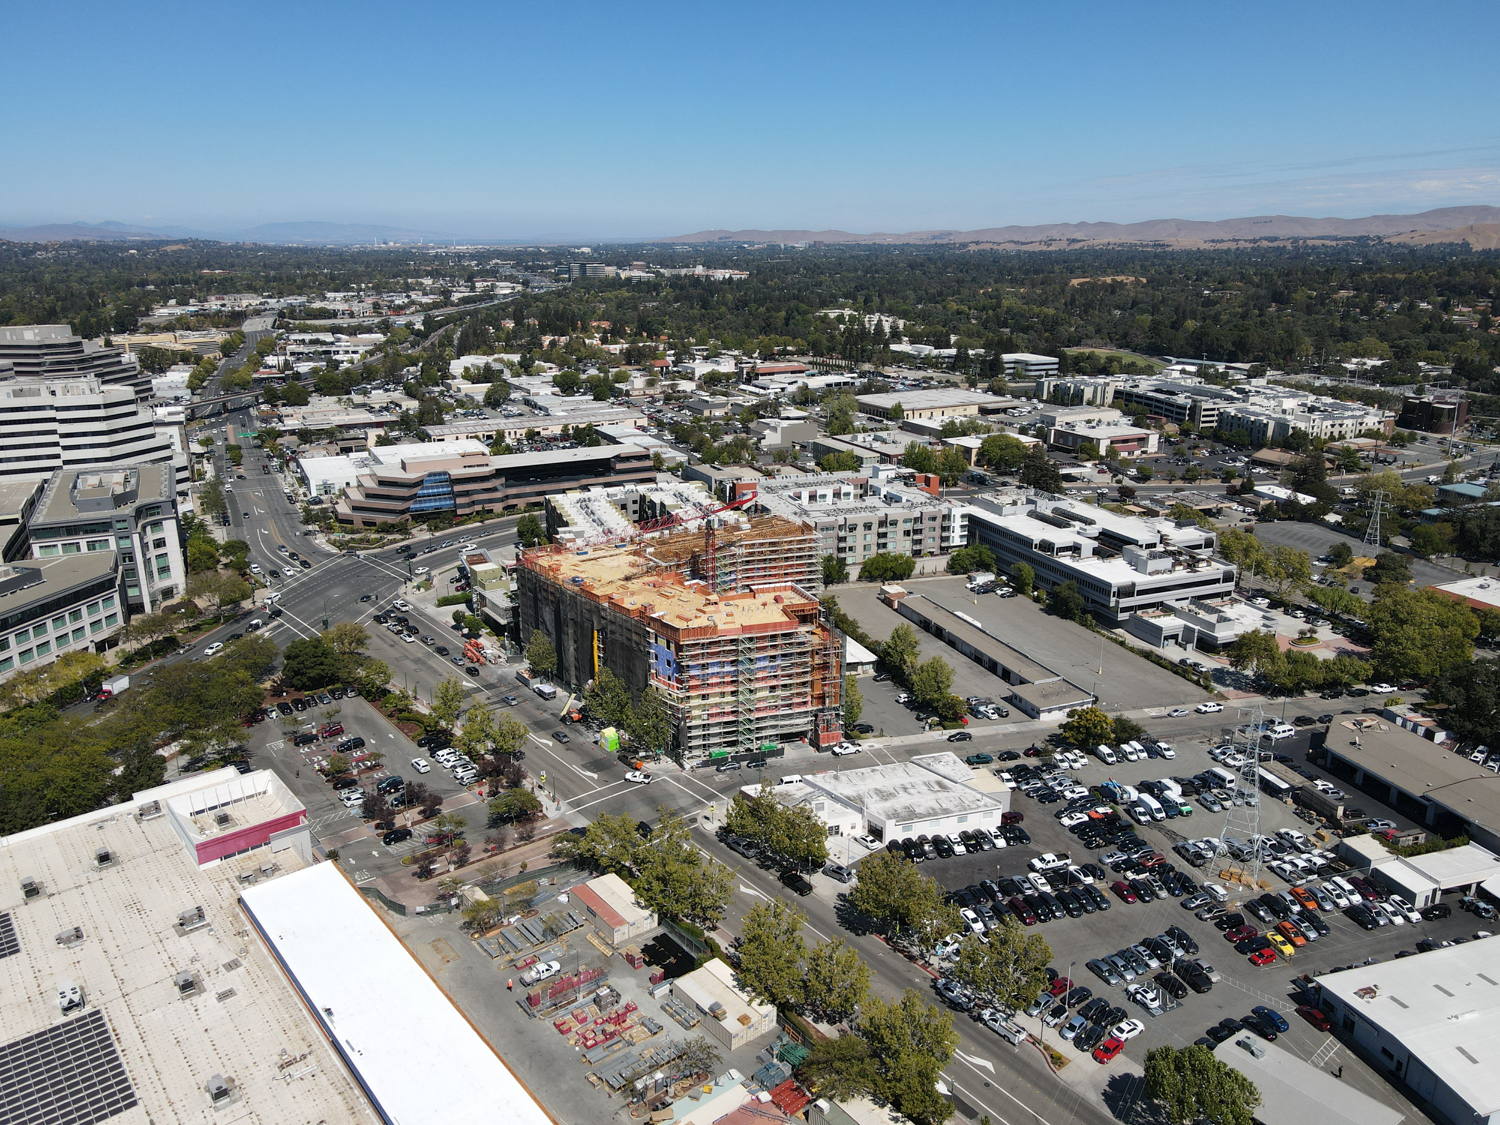 1910 NOMA aerial overlooking the immediate area in Walnut Creek